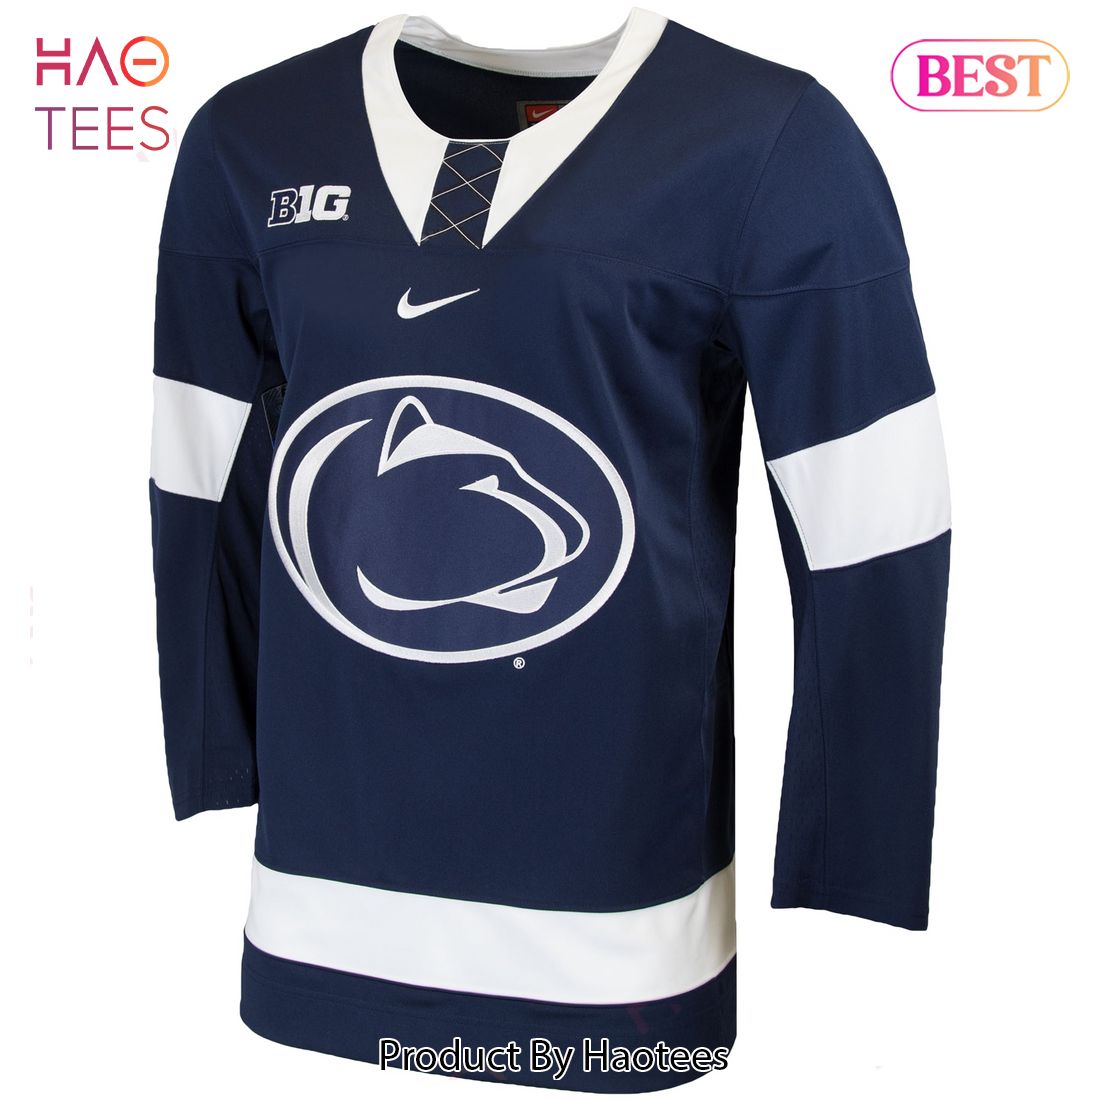 Penn State Nittany Lions Nike Replica College Hockey Jersey Navy